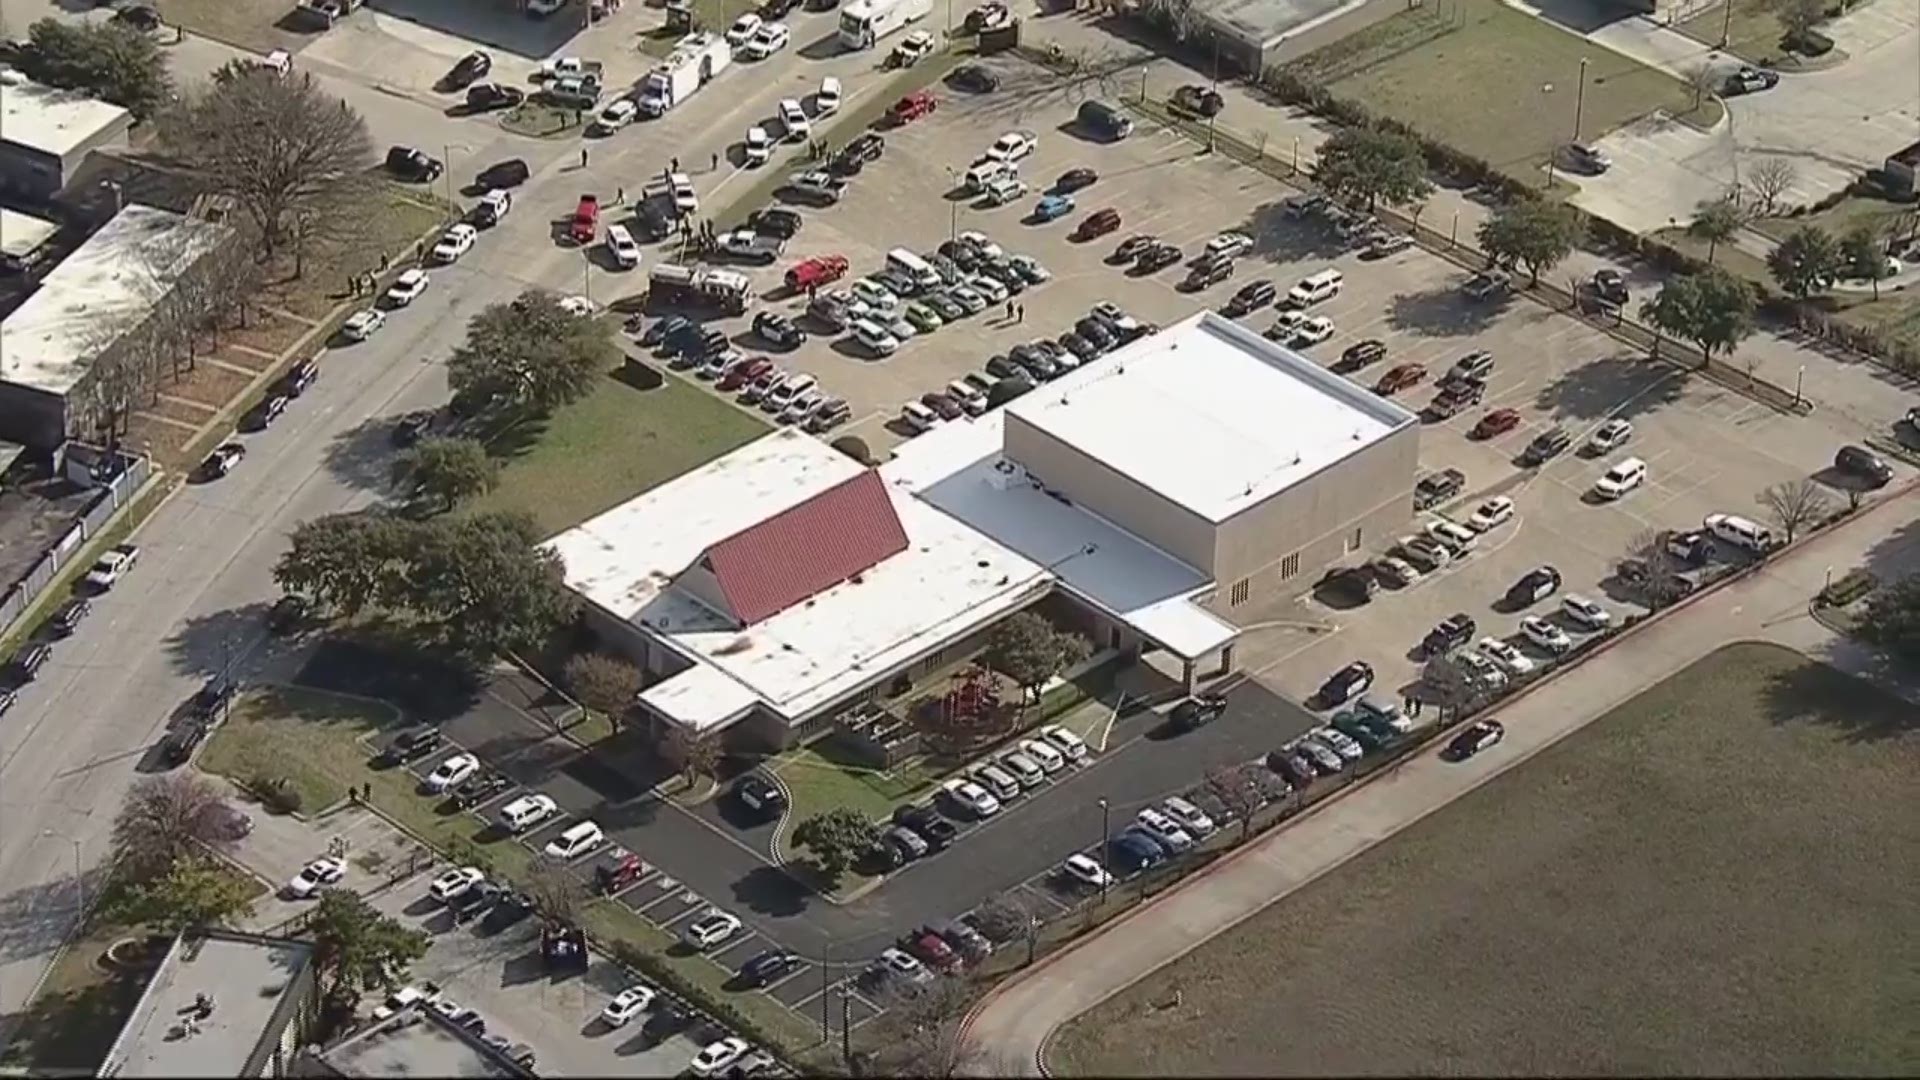 Two people were killed and one was critically injured in a shooting Sunday morning at a White Settlement church.